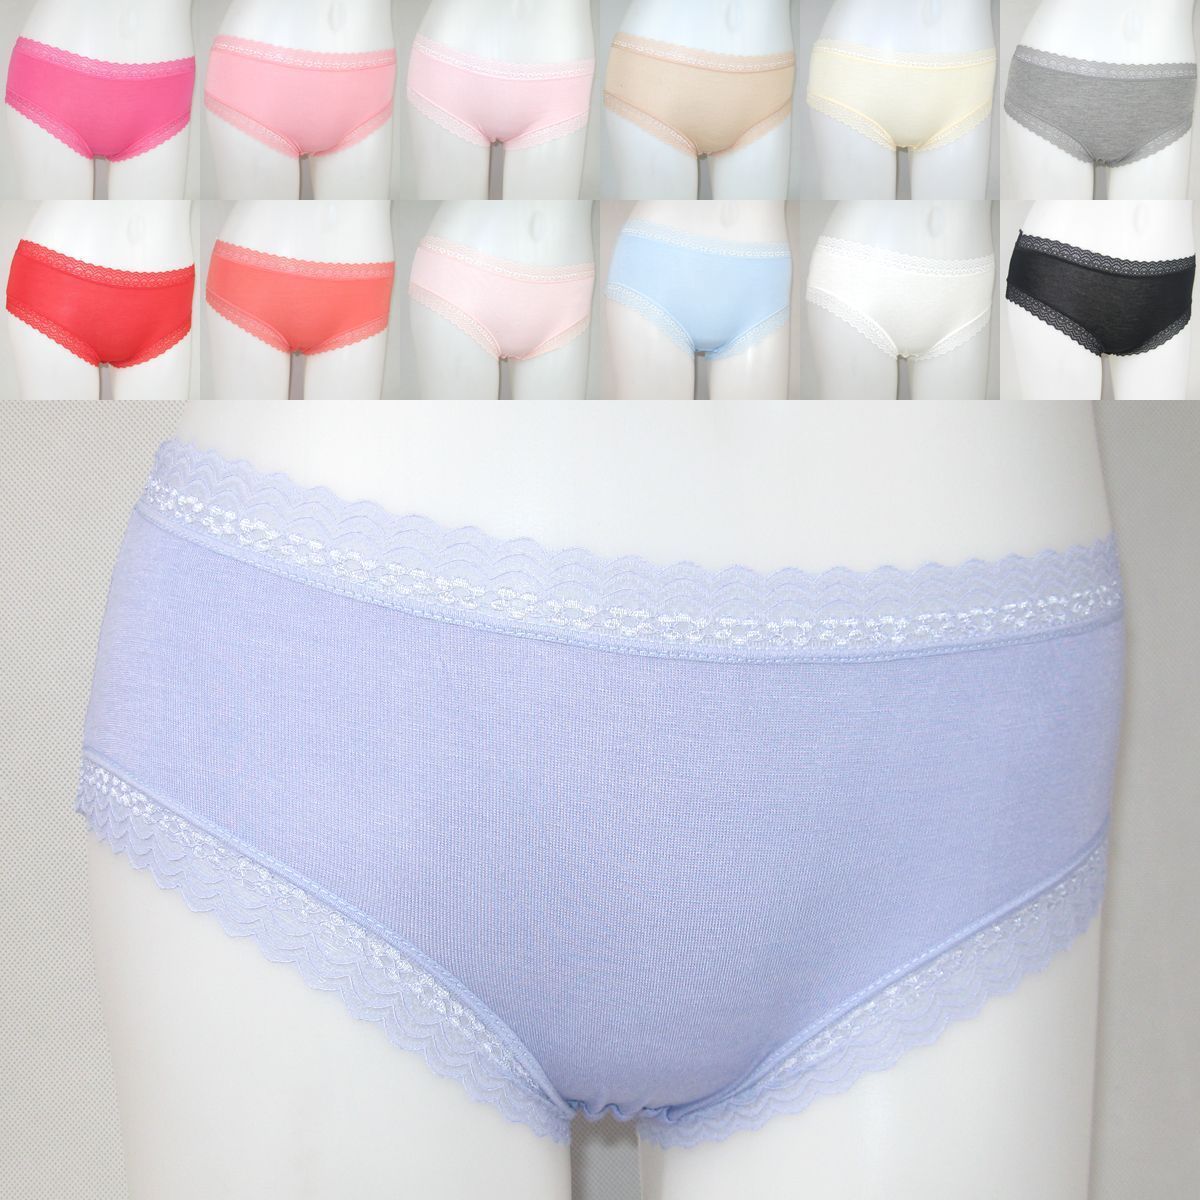 43010 # package buttocks non - trace modal in the waist high stretch breathable modal ladies comfortable underwear